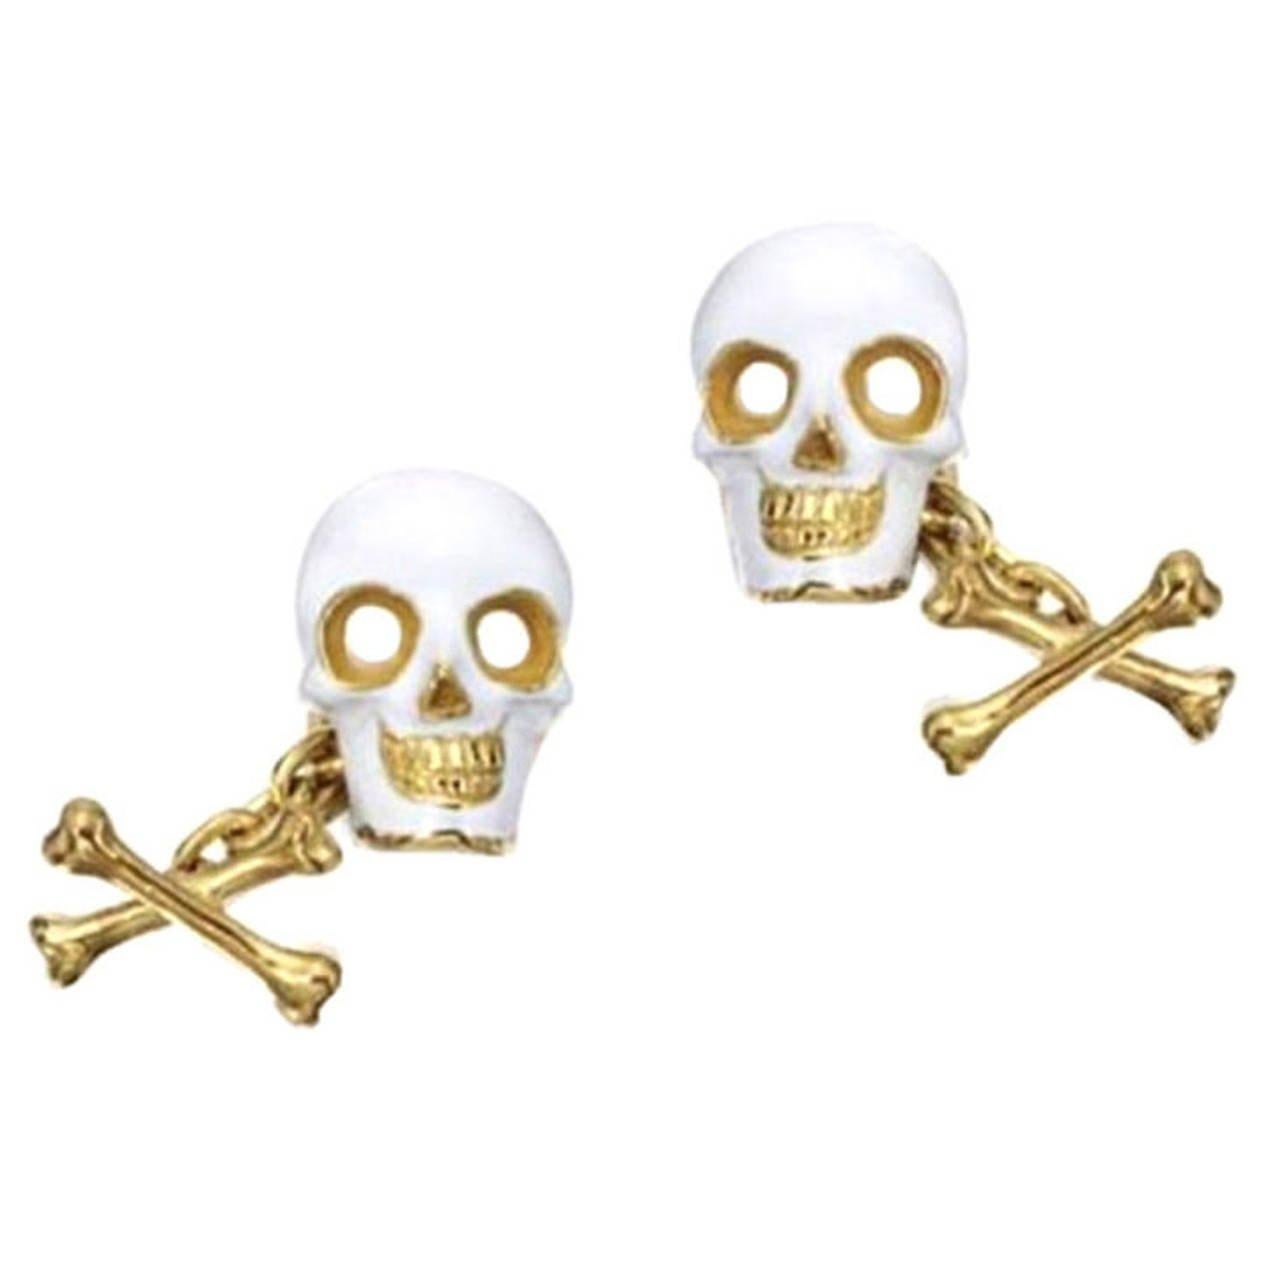 
BERNARDO ANTICHITÀ PONTE VECCHIO FLORENCE
Designed as smiling skulls and crossbones, applied with opaque white enamel. 

Mounted in 18Kt yellow gold

Weight: 24.1 gr